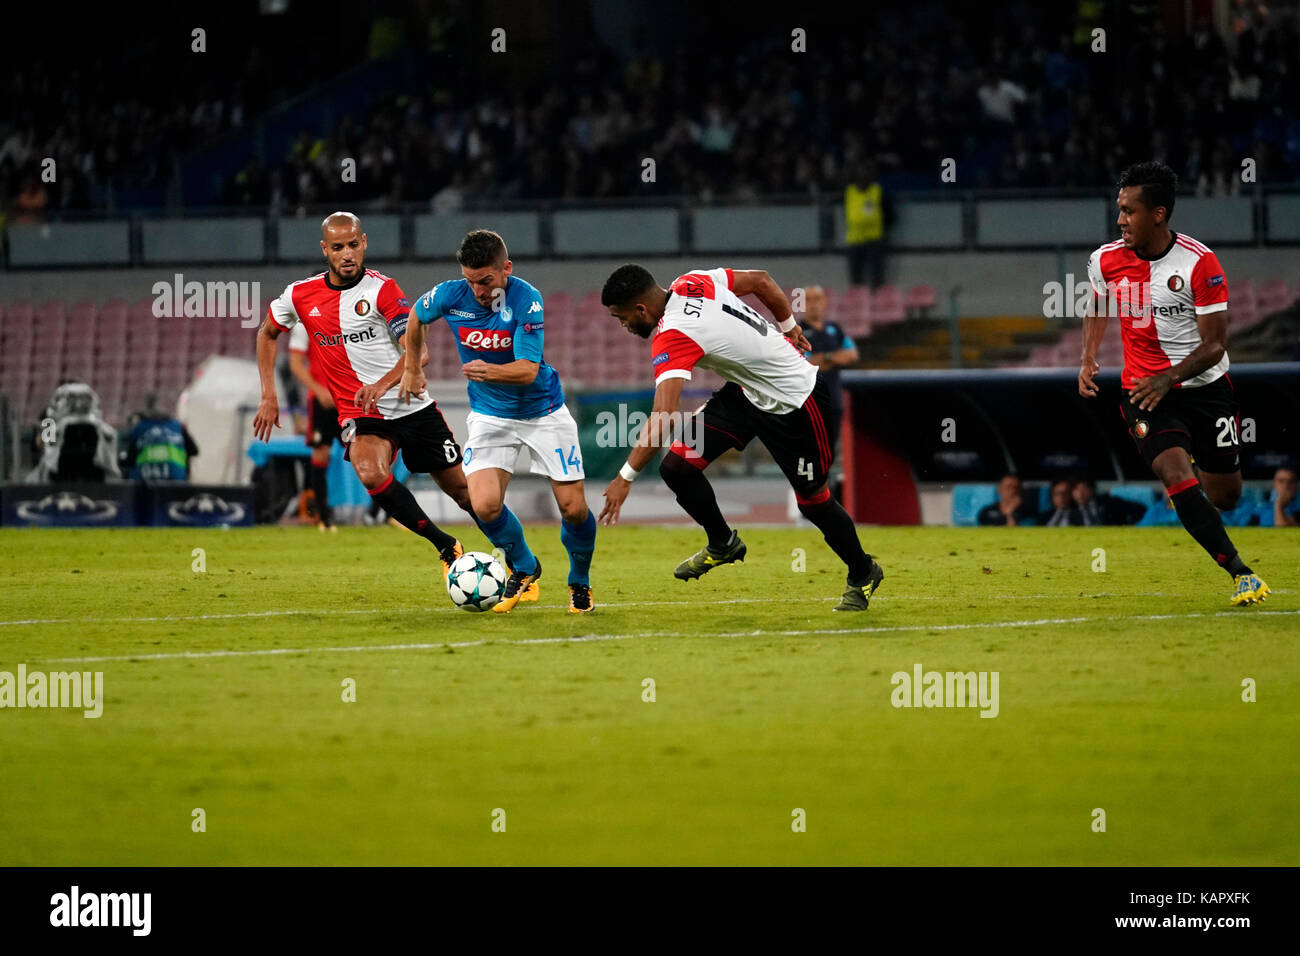 Napoli, Italy. 26th Sep, 2017. Naples - Italy 26/09/2017 DRIES MERTENS of S.S.C. NAPOLI and JEREMIAH ST.JUSTE and KARIM EL AHMADI and RENATO TAPIA of FEYENOORD fights for the ball during Uefa Champion's league match between S.S.C. NAPOLI and FEYENOORD at Stadio San Paolo of Naples. Credit: Emanuele Sessa/Pacific Press/Alamy Live News Stock Photo